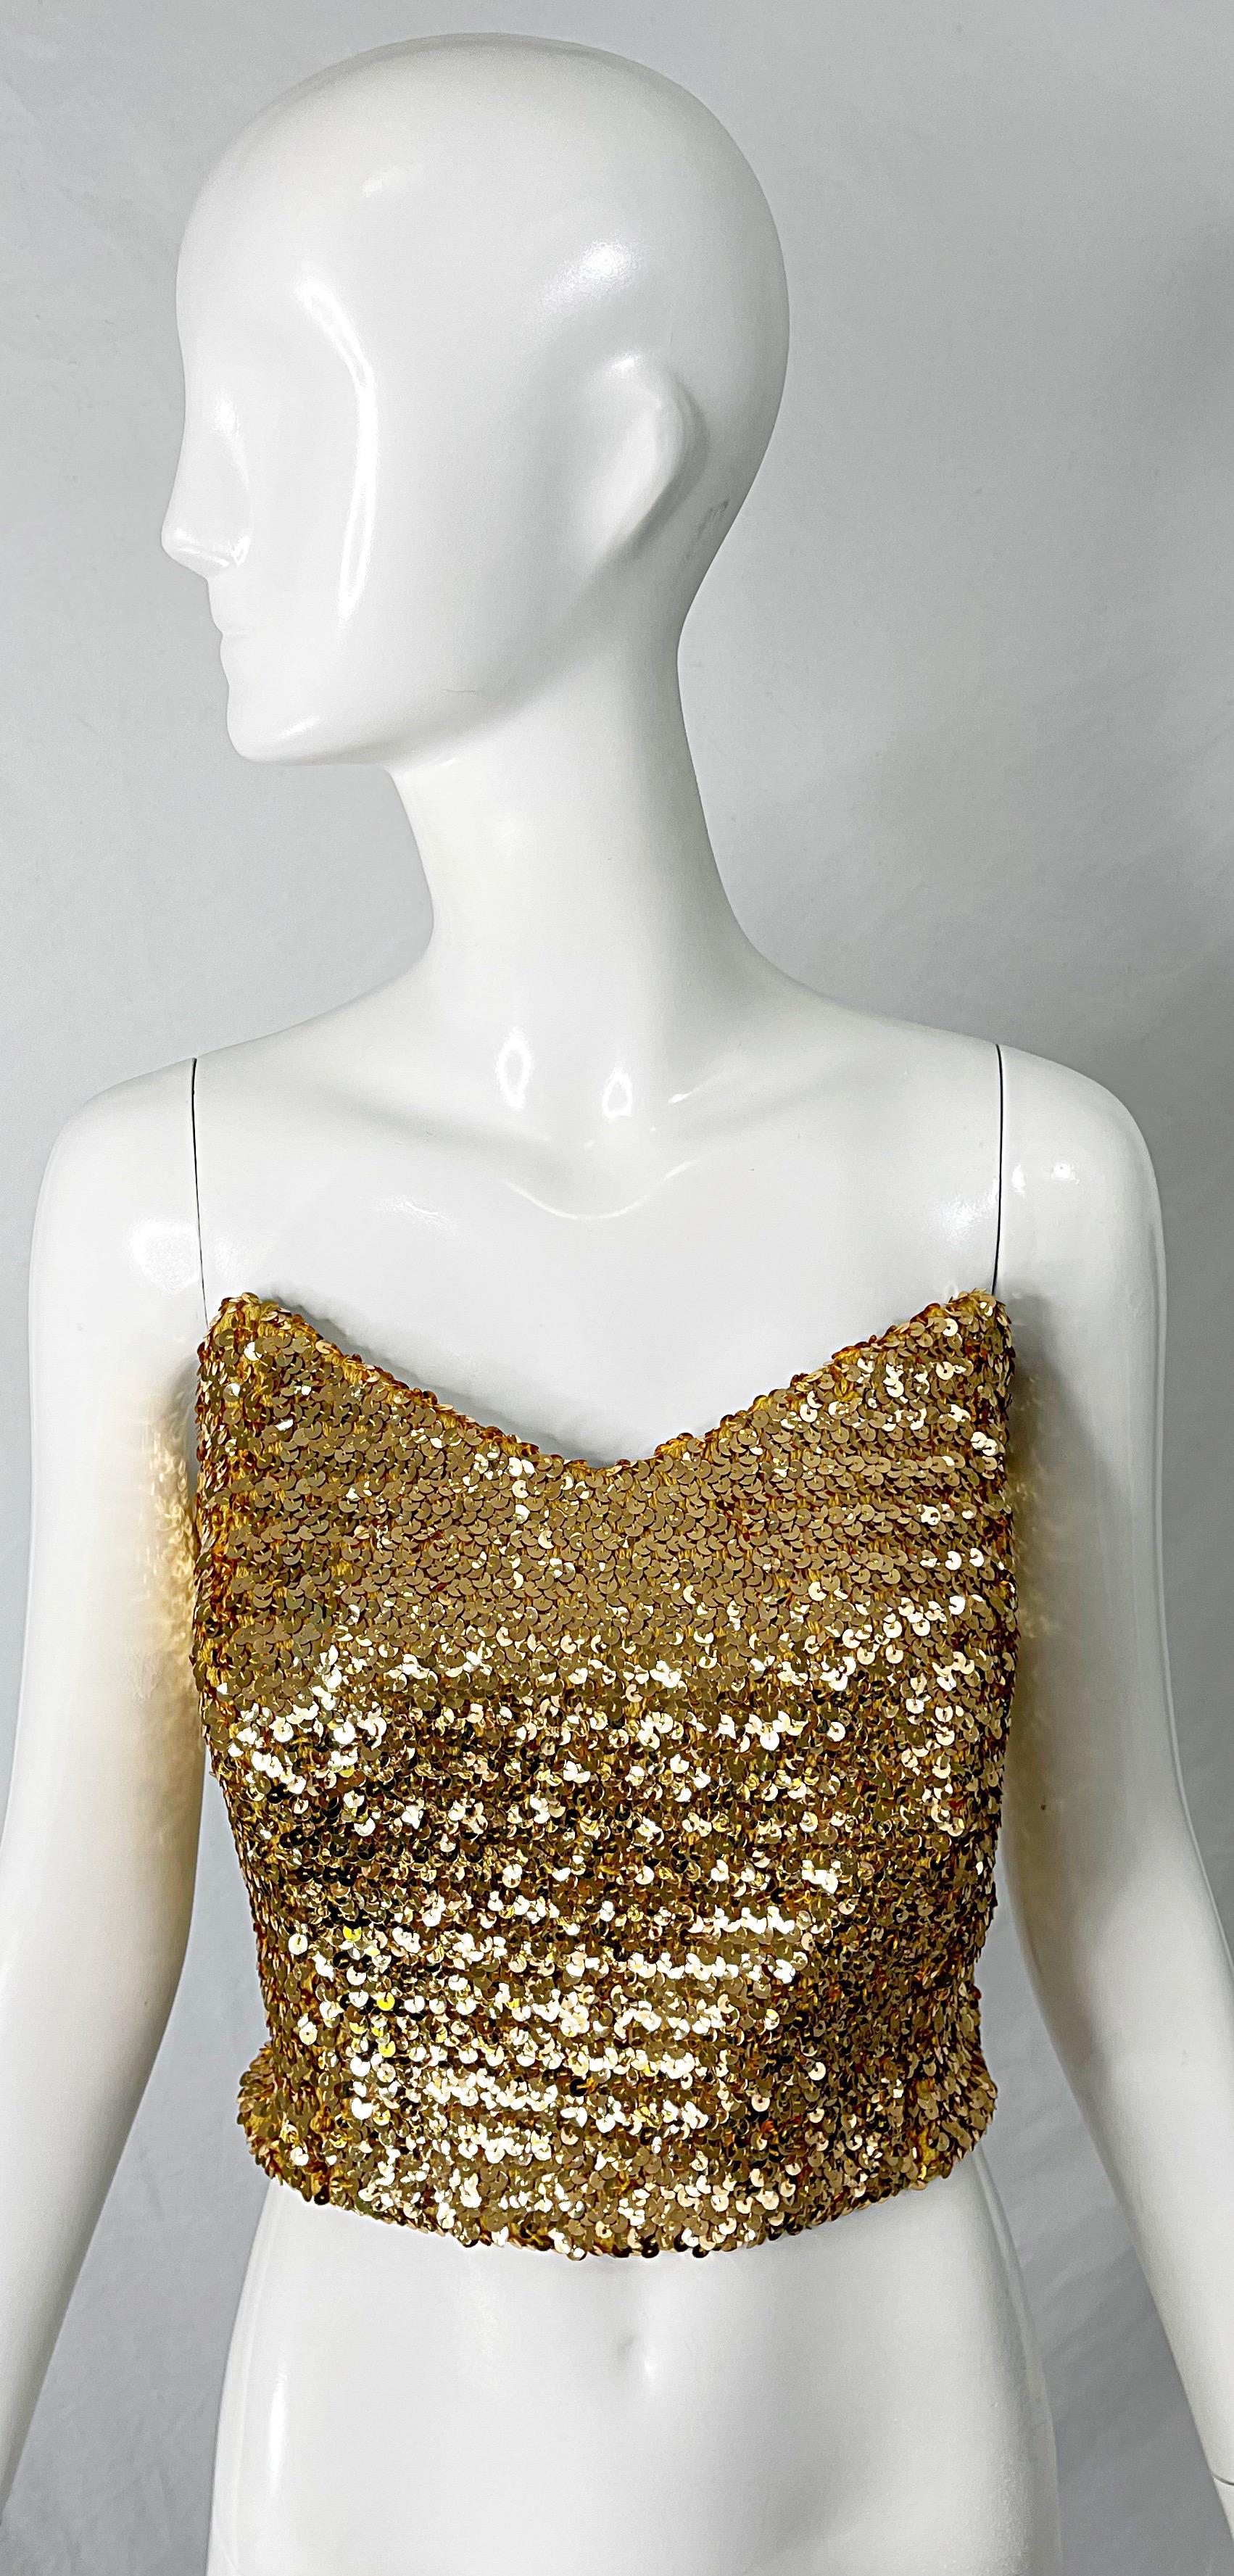 Wonderful 1950s metallic gold fully sequin strapless bustier top ! Features thousands of hand-sewn gold sequins throughout. Hidden metal zipper up the back with hook-and-eye closure. Great with jeans, a skirt, trousers or a skirt.
In great